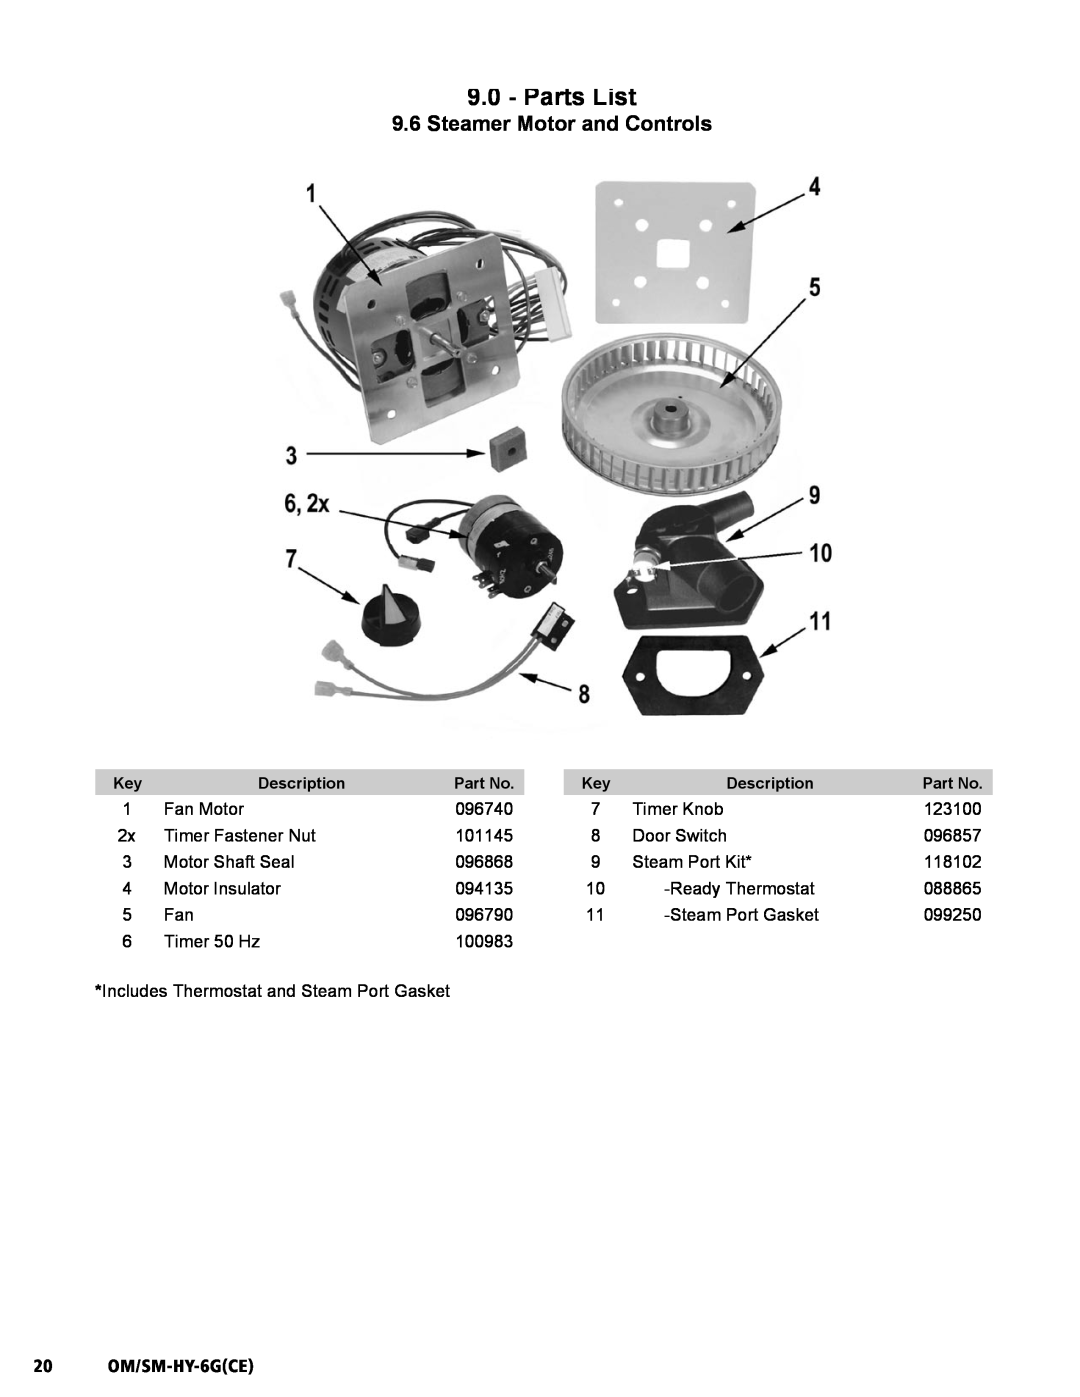 Unified Brands HY-6G(CE) service manual 9.6Steamer Motor and Controls, Parts List, 20 OM/SM-HY-6GCE 